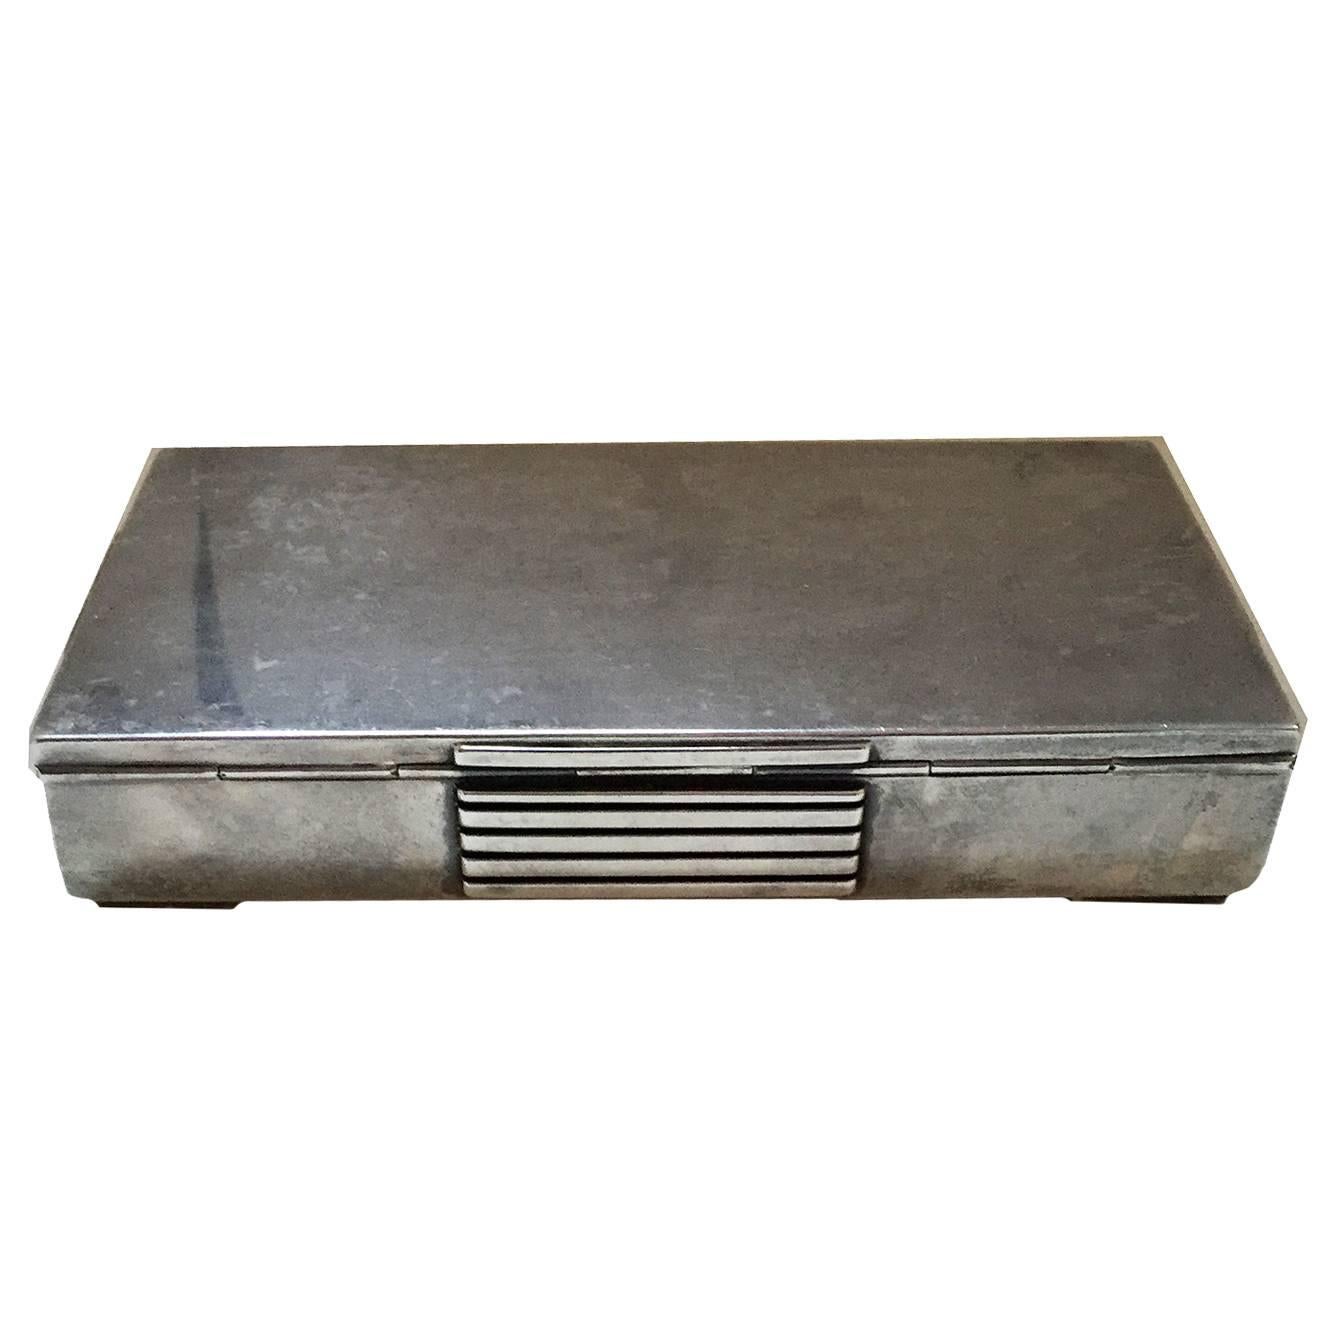 Art Moderne Georg Jensen sterling silver box designed by Jürgen Jensen, Denmark, Style 857A, designed of rounded-rectangular form, each side with an raised, horizontally-ribbed panel placed in the center side. The whole on low, rectilinear squared